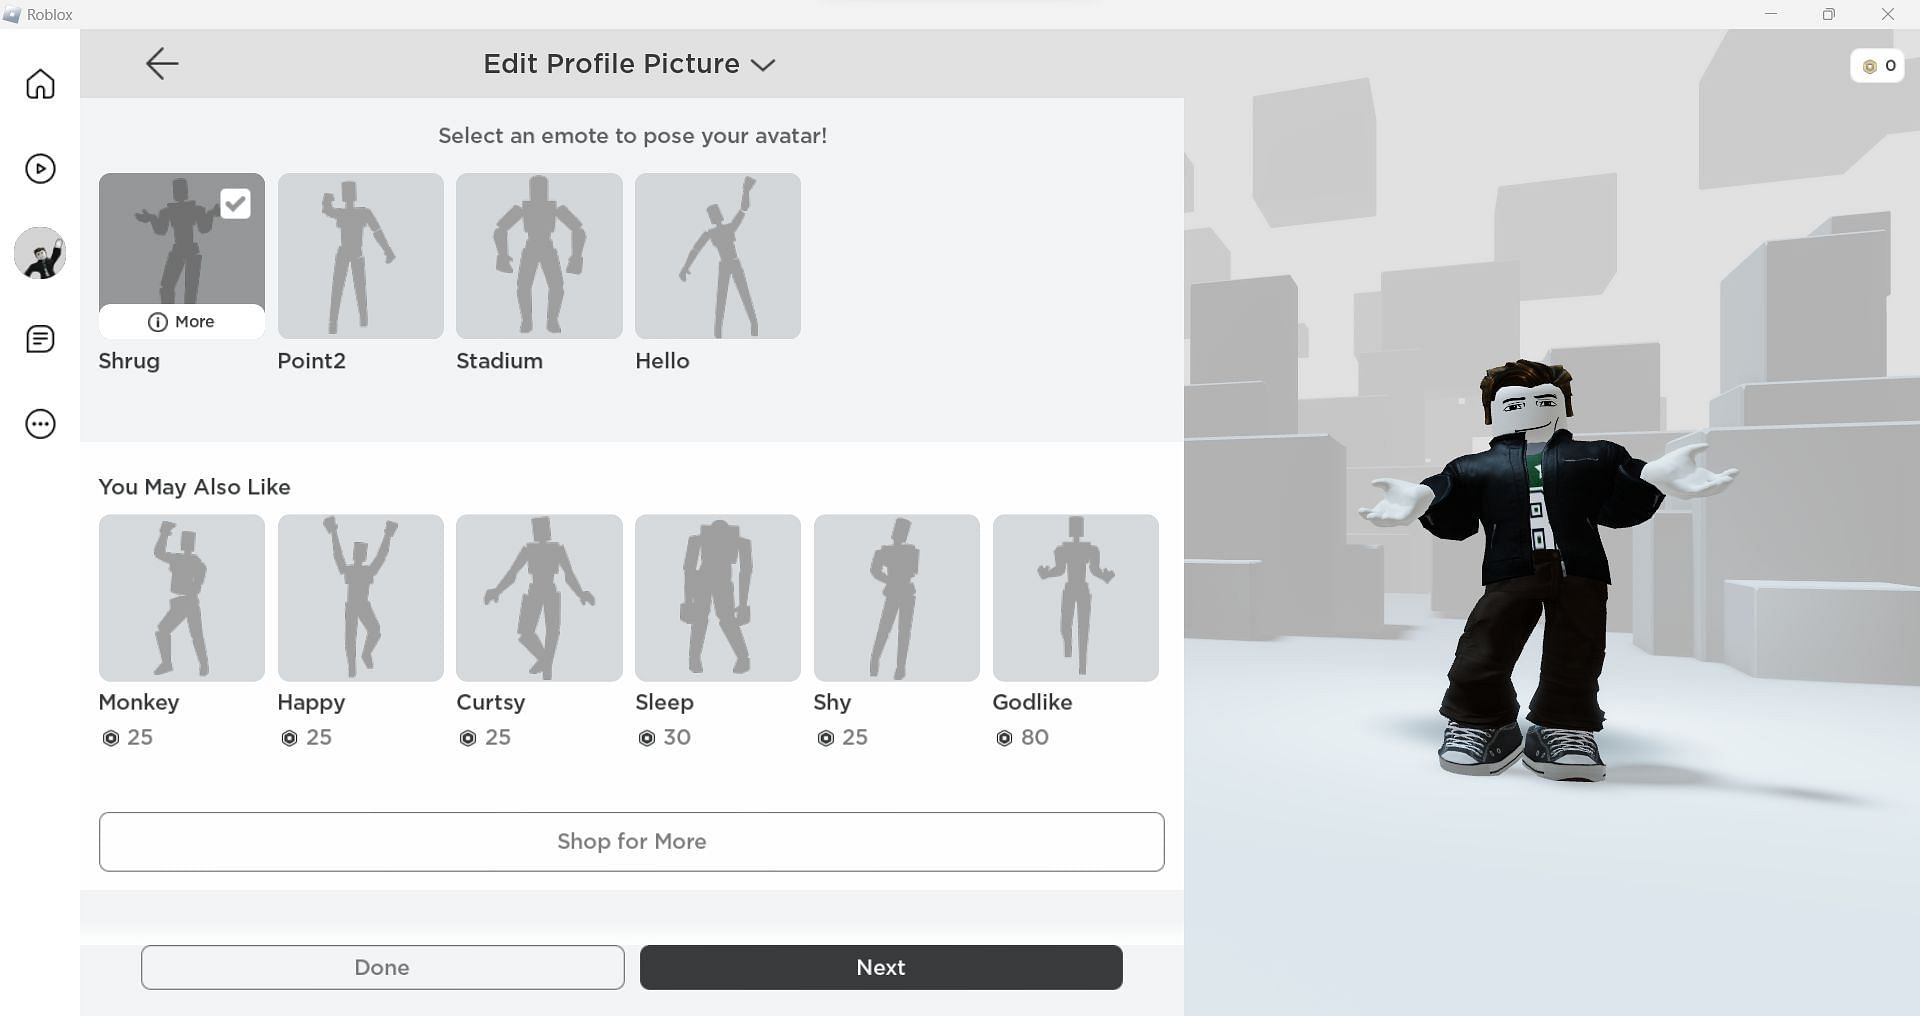 New Roblox Update for Switching Profiles! 